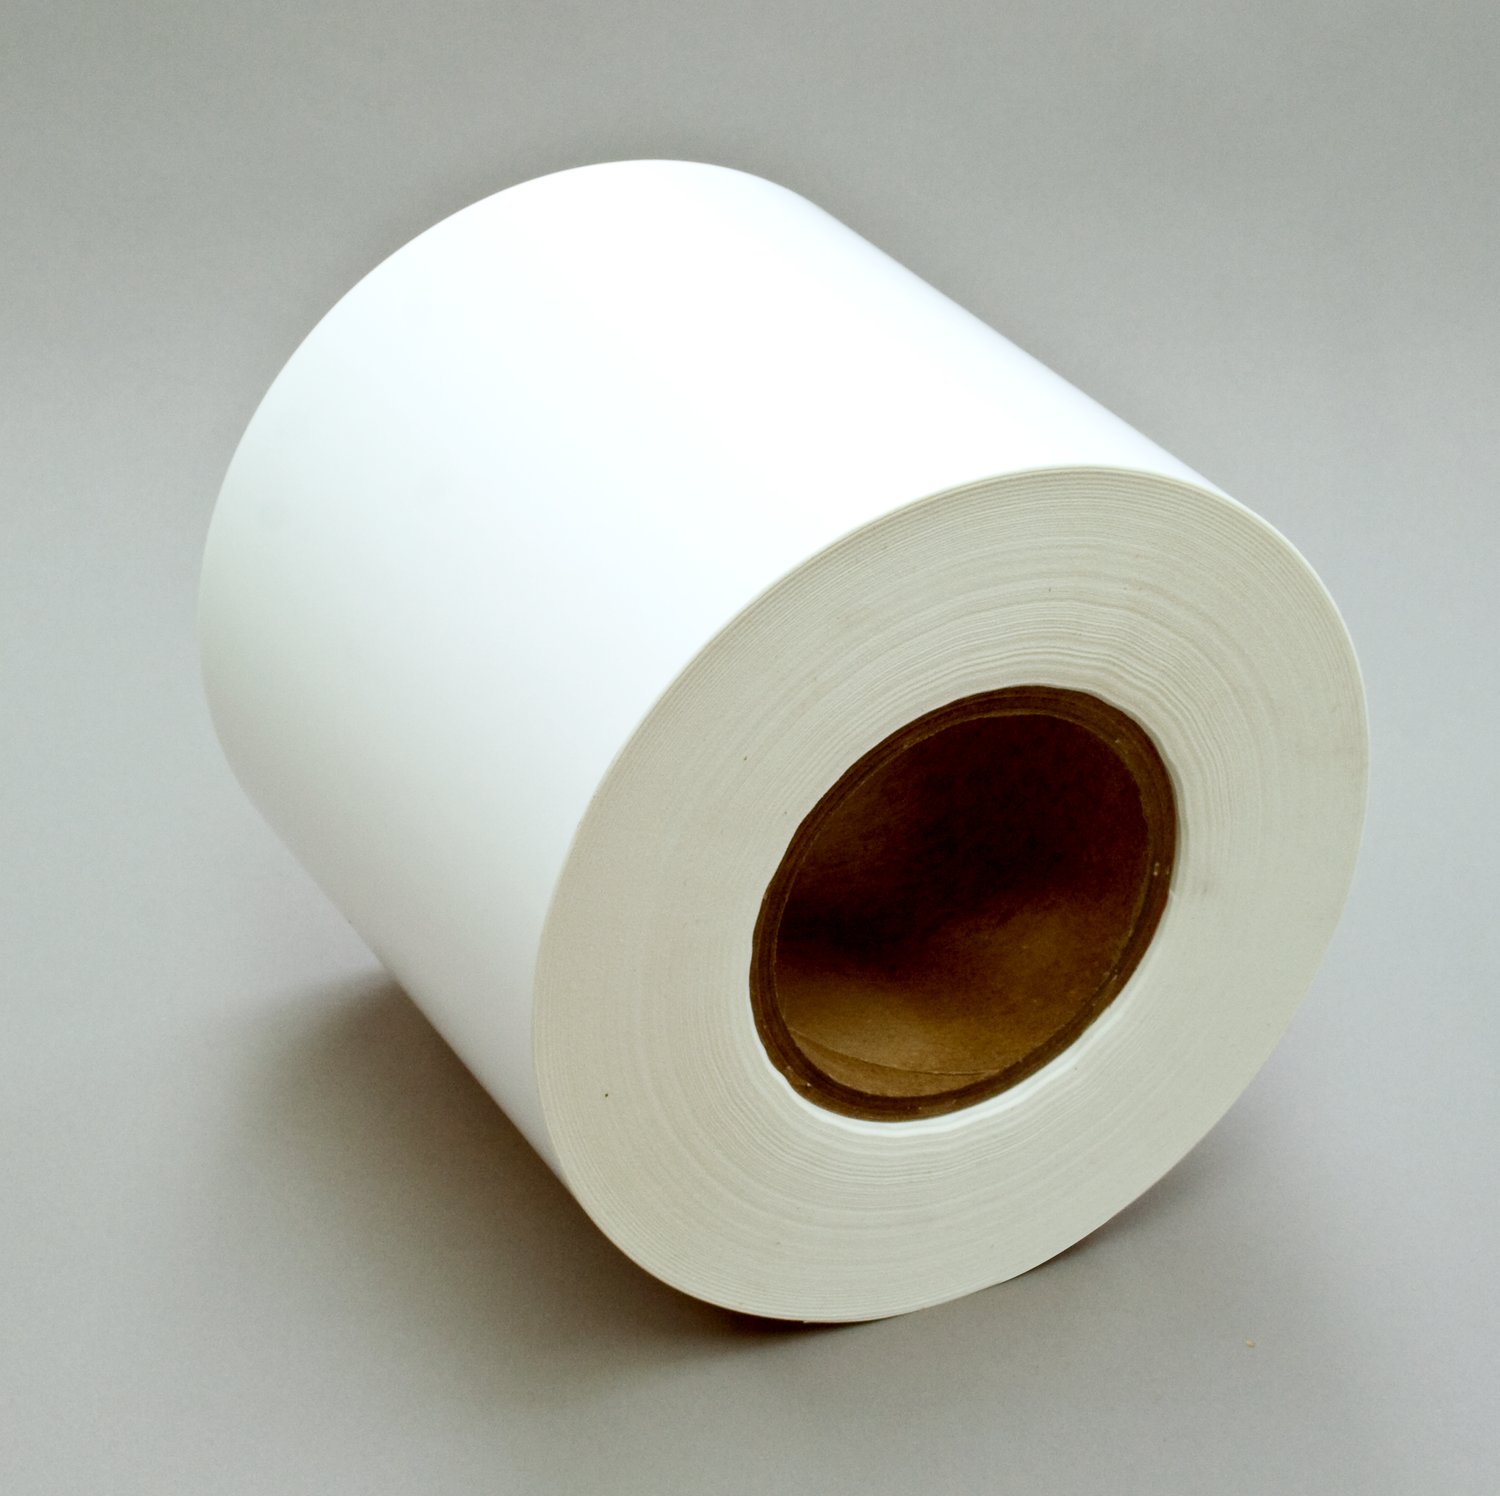 7100072910 - 3M Sheet and Screen Label Material 7220SA, White Polyester, Sheet,
Config